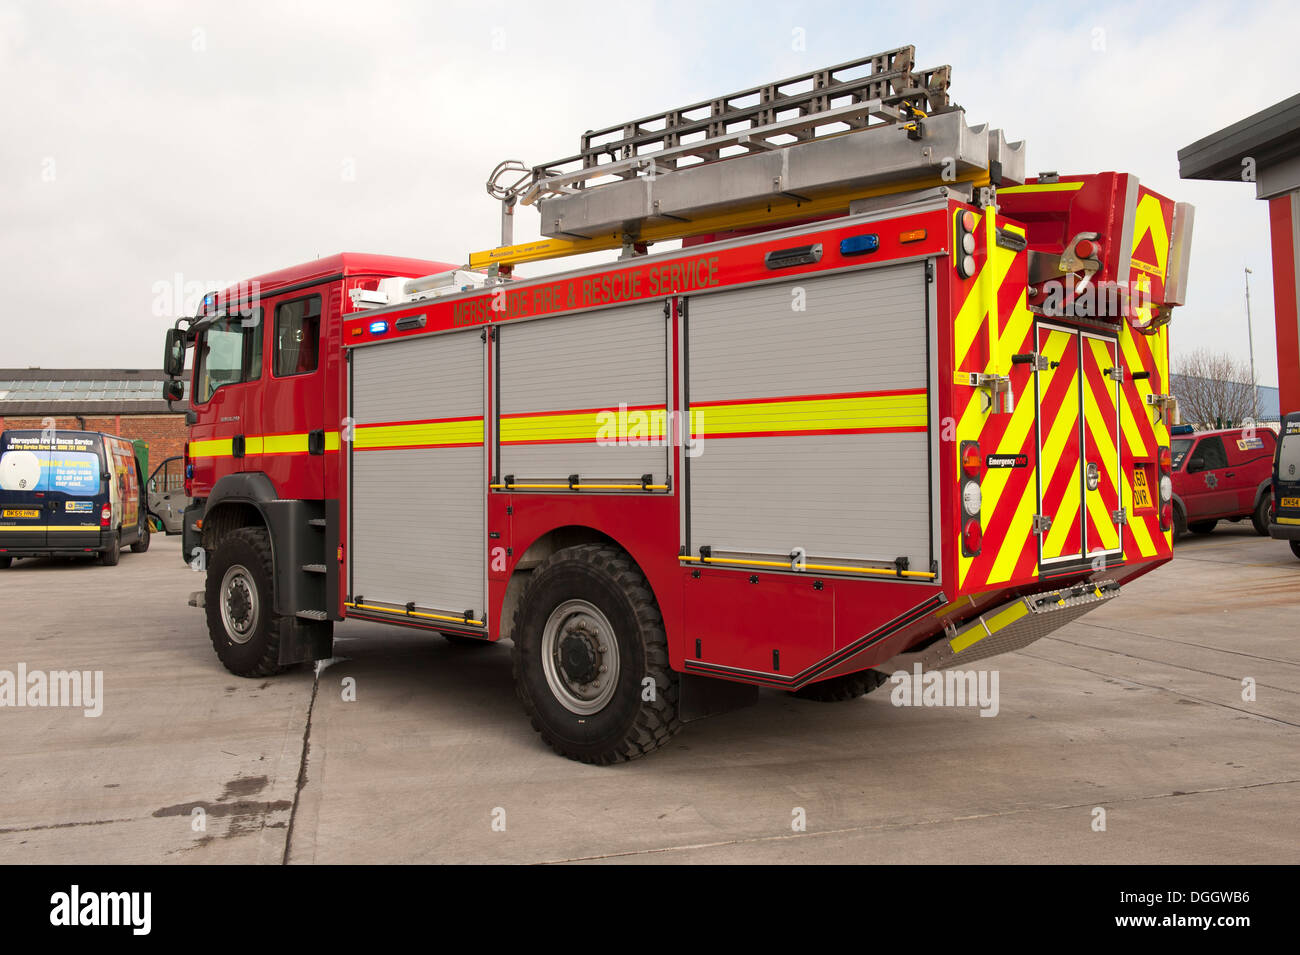 4 wheel drive off road fire engine truck Stock Photo